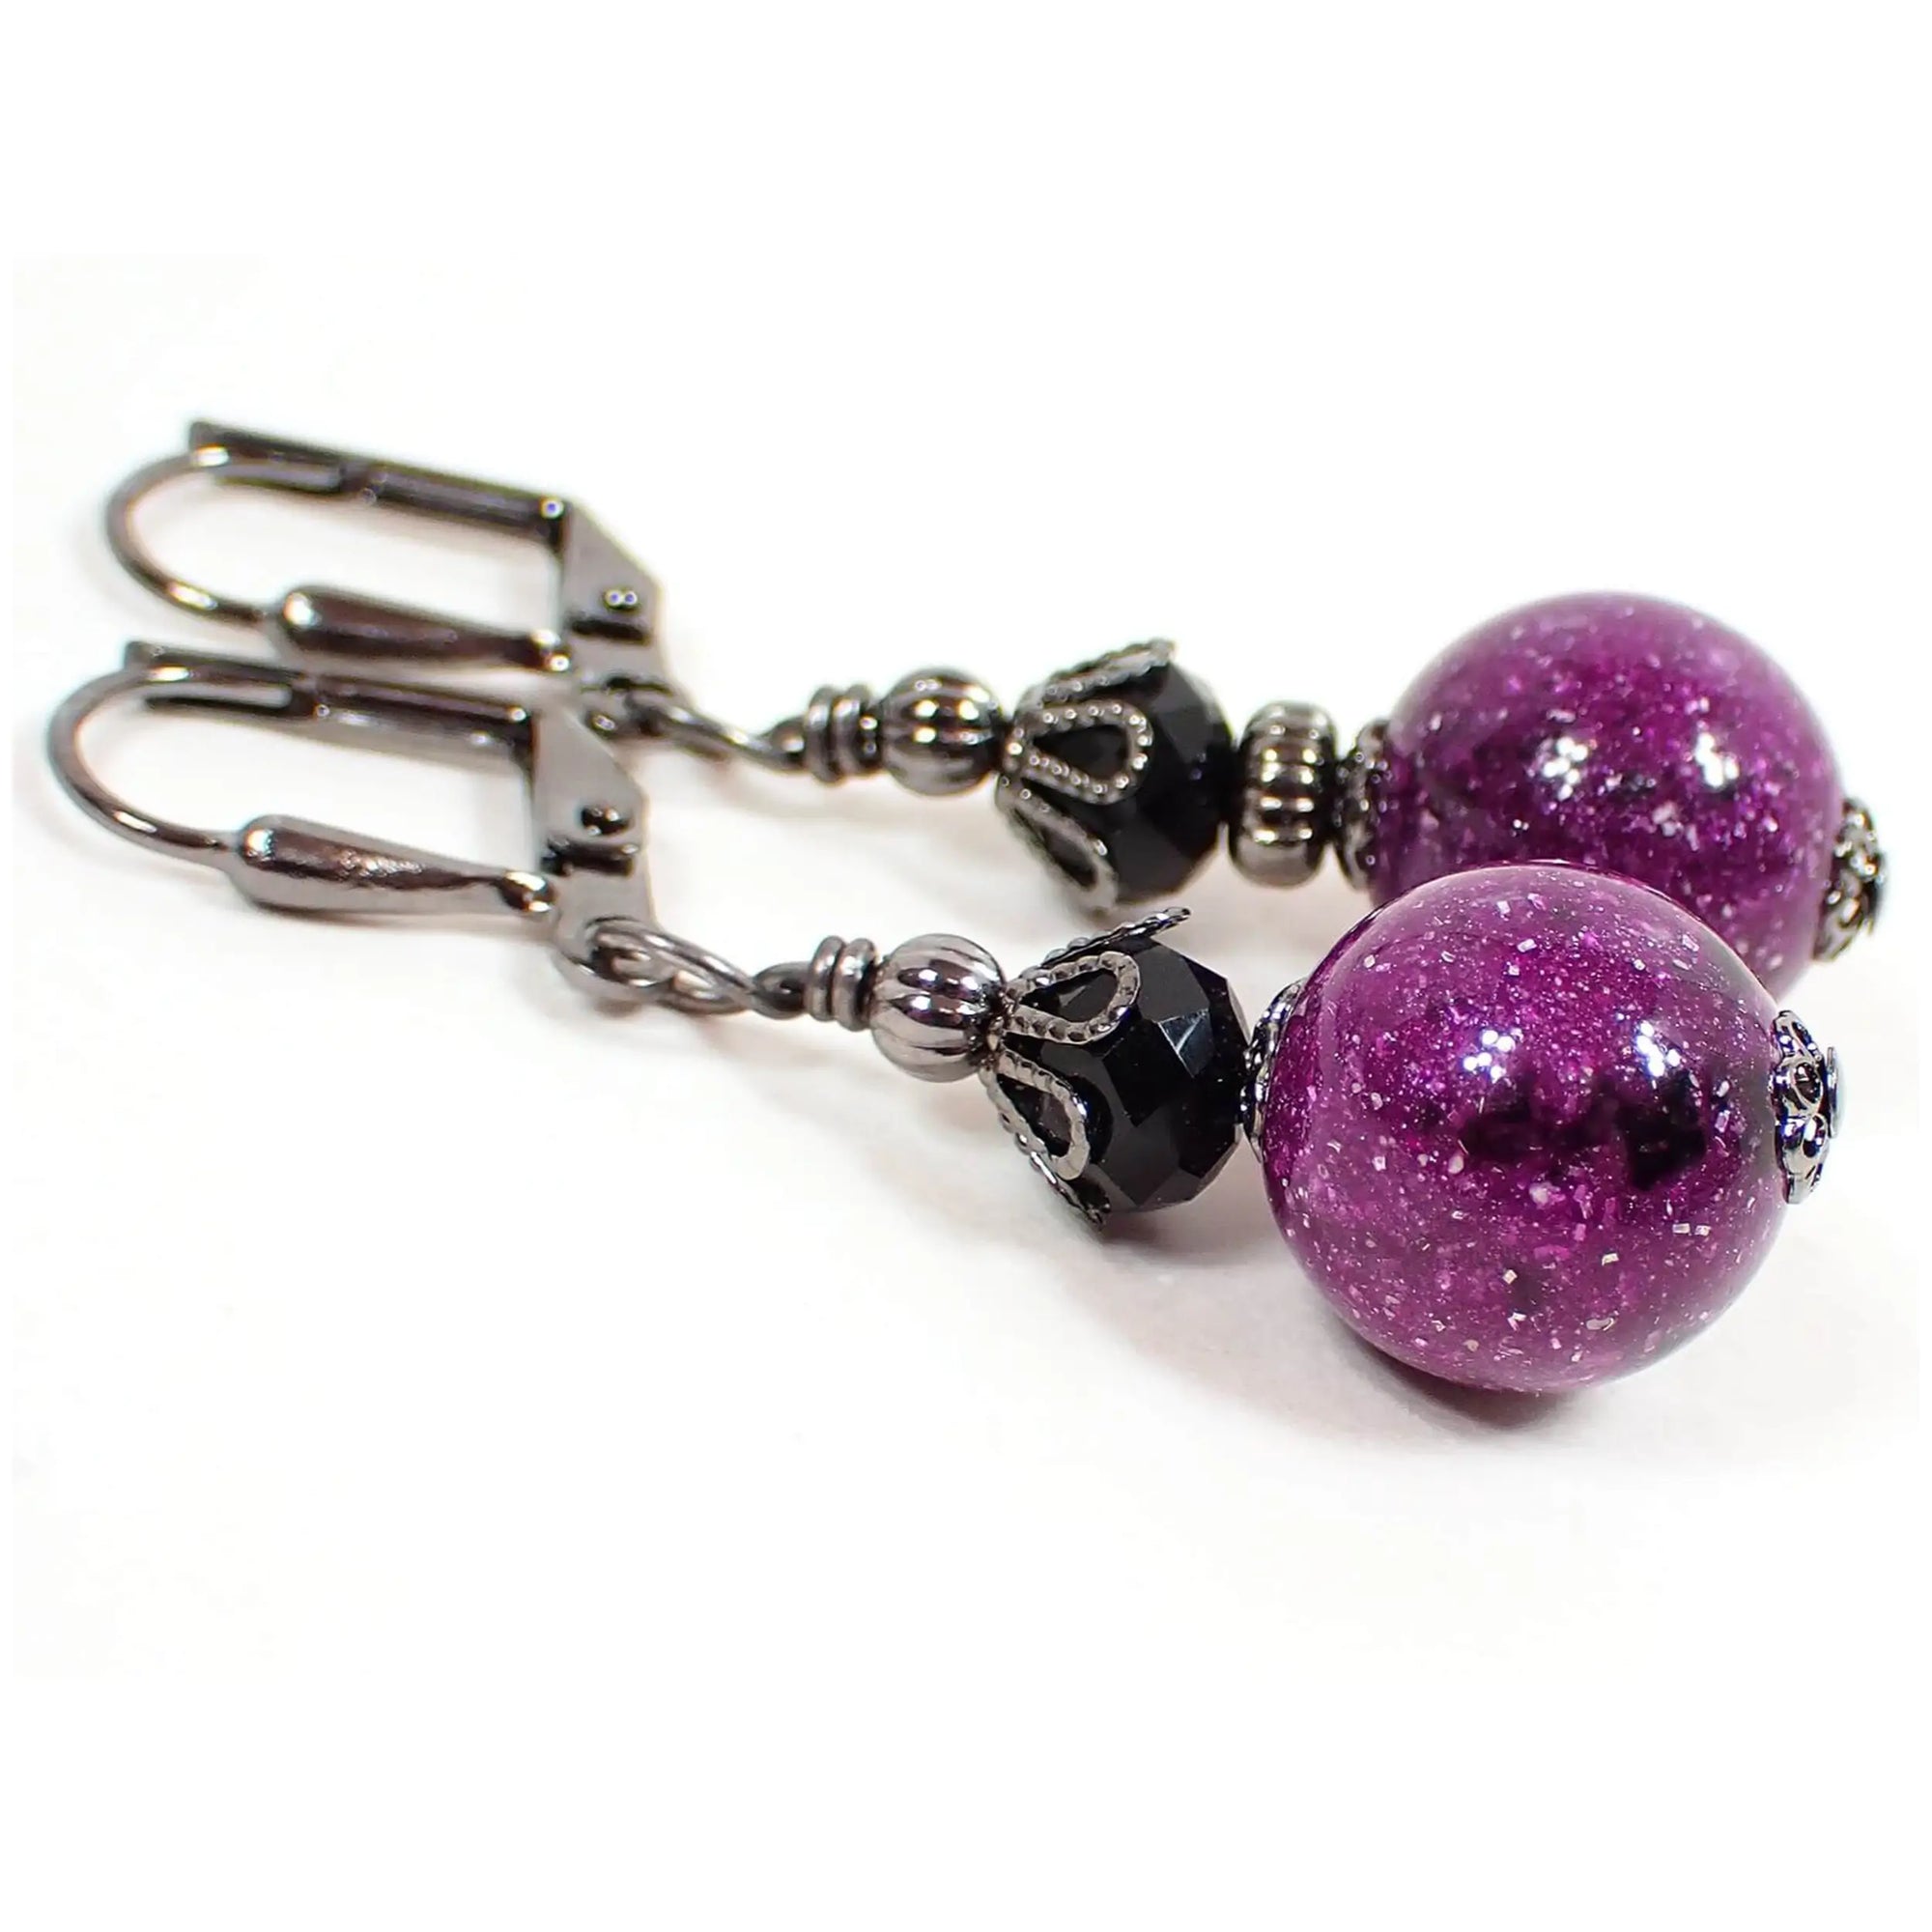 Angled view of the handmade drop earrings made with vintage lucite beads. The metal is gunmetal gray in color. There is a faceted black crystal glass bead at the top. The bottom lucite beads are round ball shaped and are purple with marbled areas of black and tiny flecks of confetti and glitter for a bit of sparkle as you move around in the light.